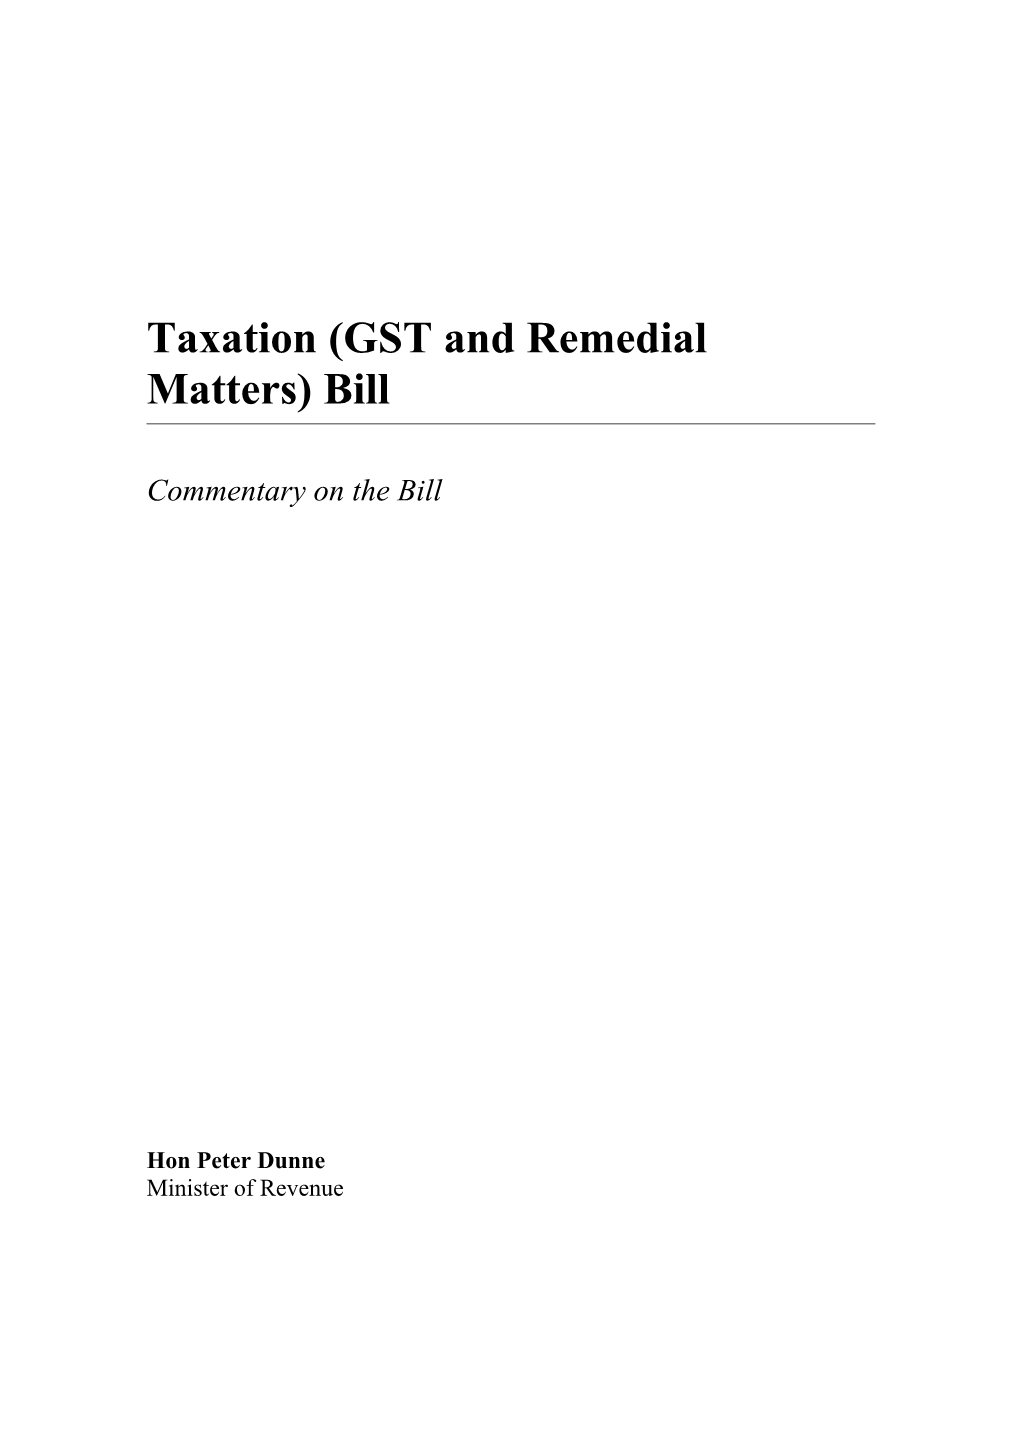 Taxation (GST and Remedial Matters) Bill - Commentary on the Bill